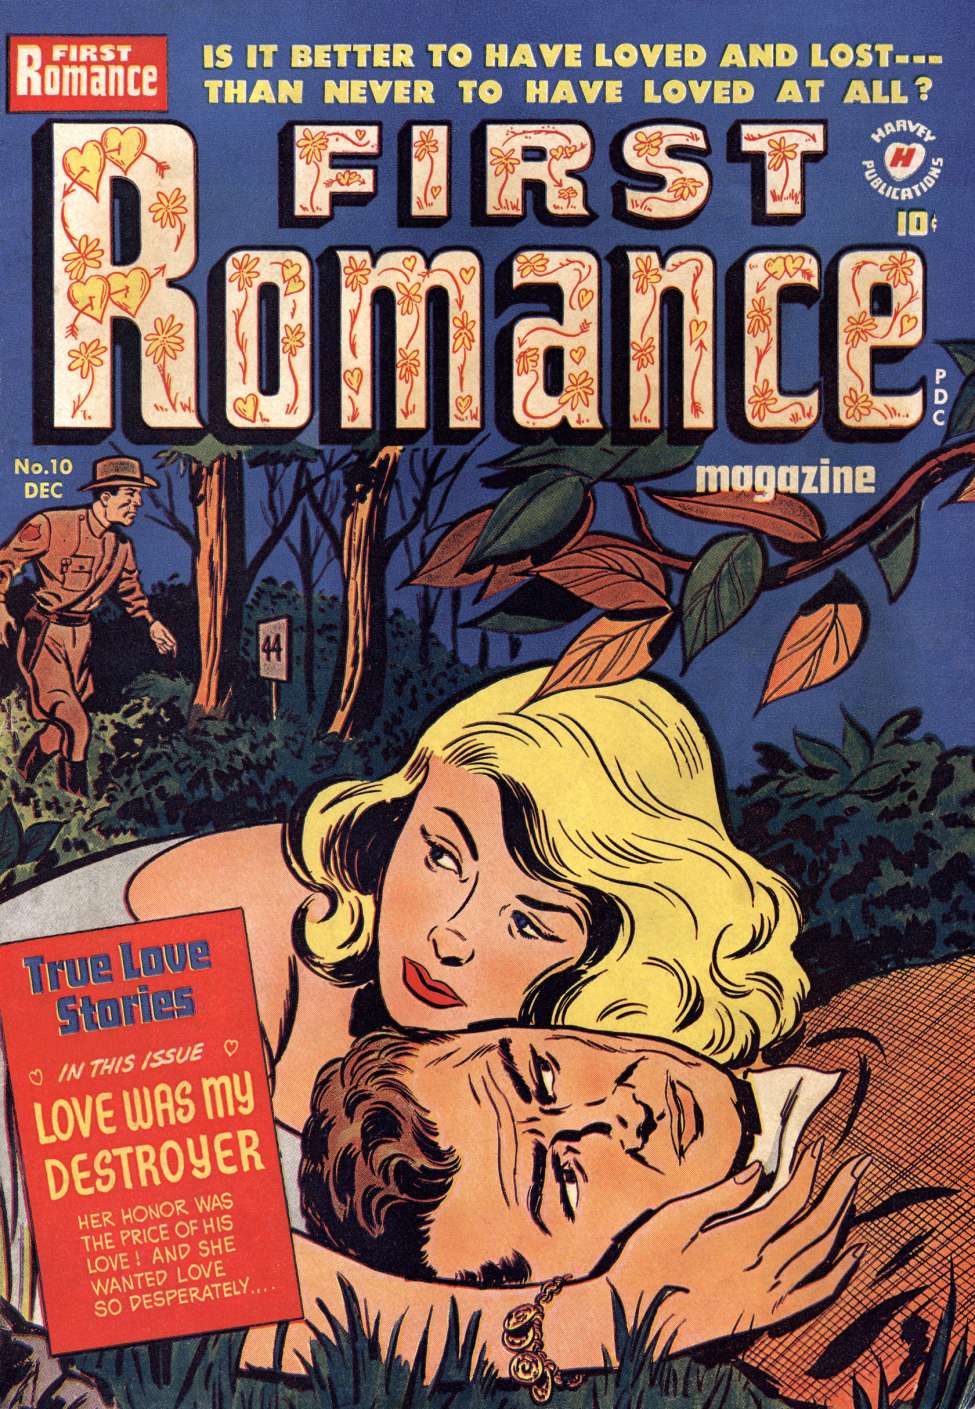 Comic Book Cover For First Romance Magazine 10